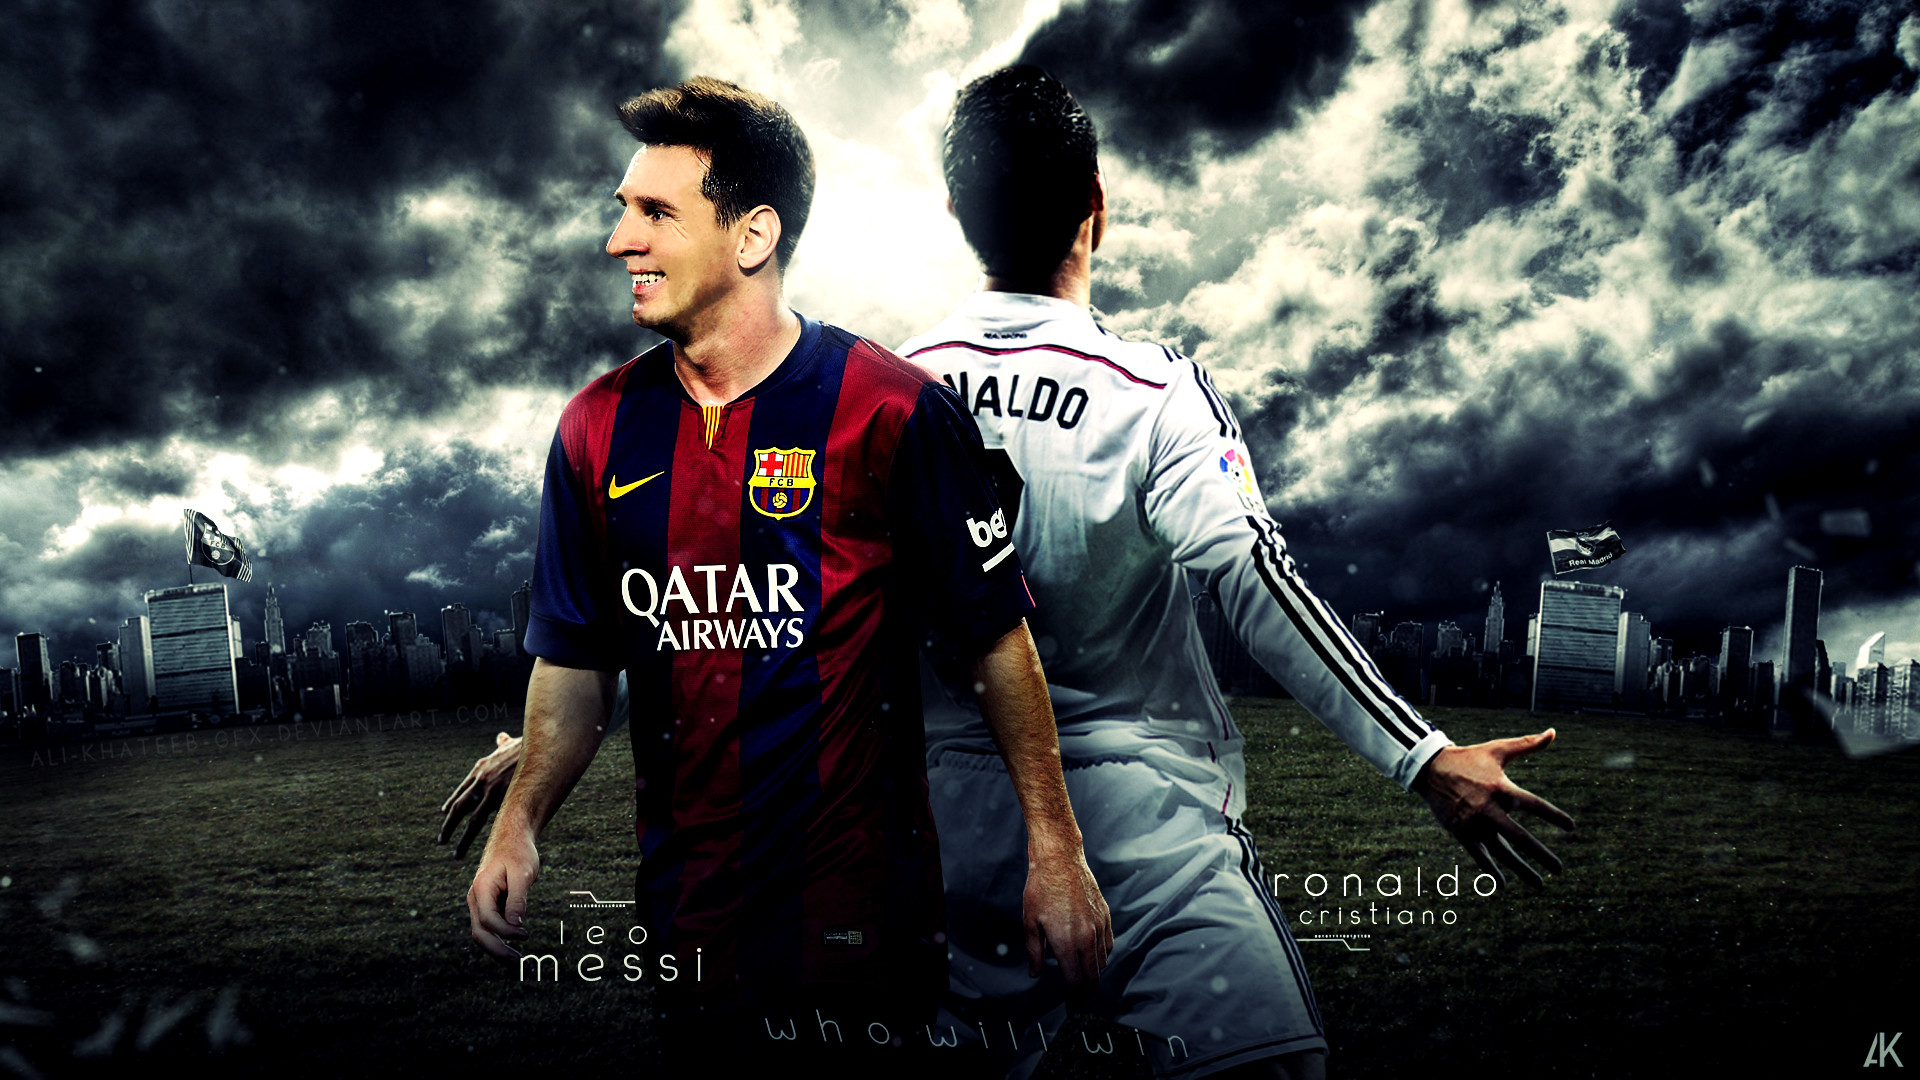 1920x1080 Cr7 Galaxy Wallpaper Picture | Amazing Wallpapers | Pinterest | Wallpaper  pictures, Messi and Ronaldo